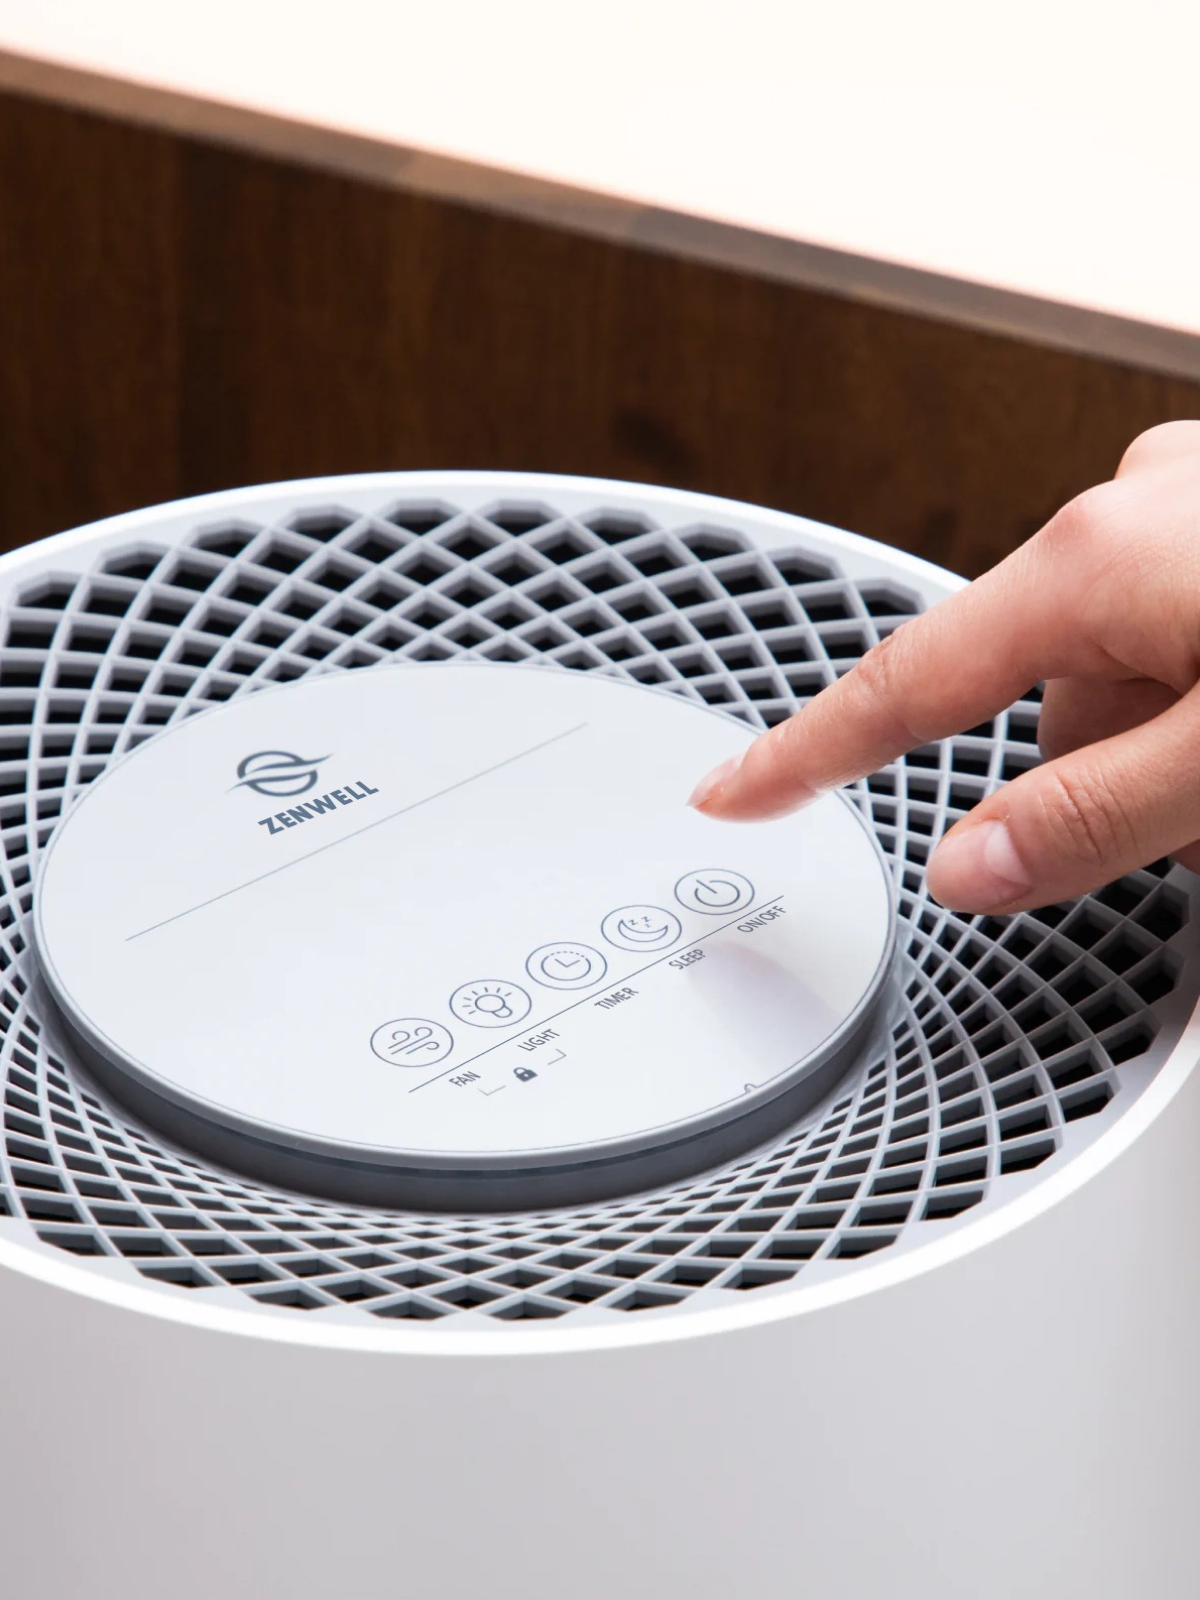 Hand turning on Zenwell appliance with its touch display